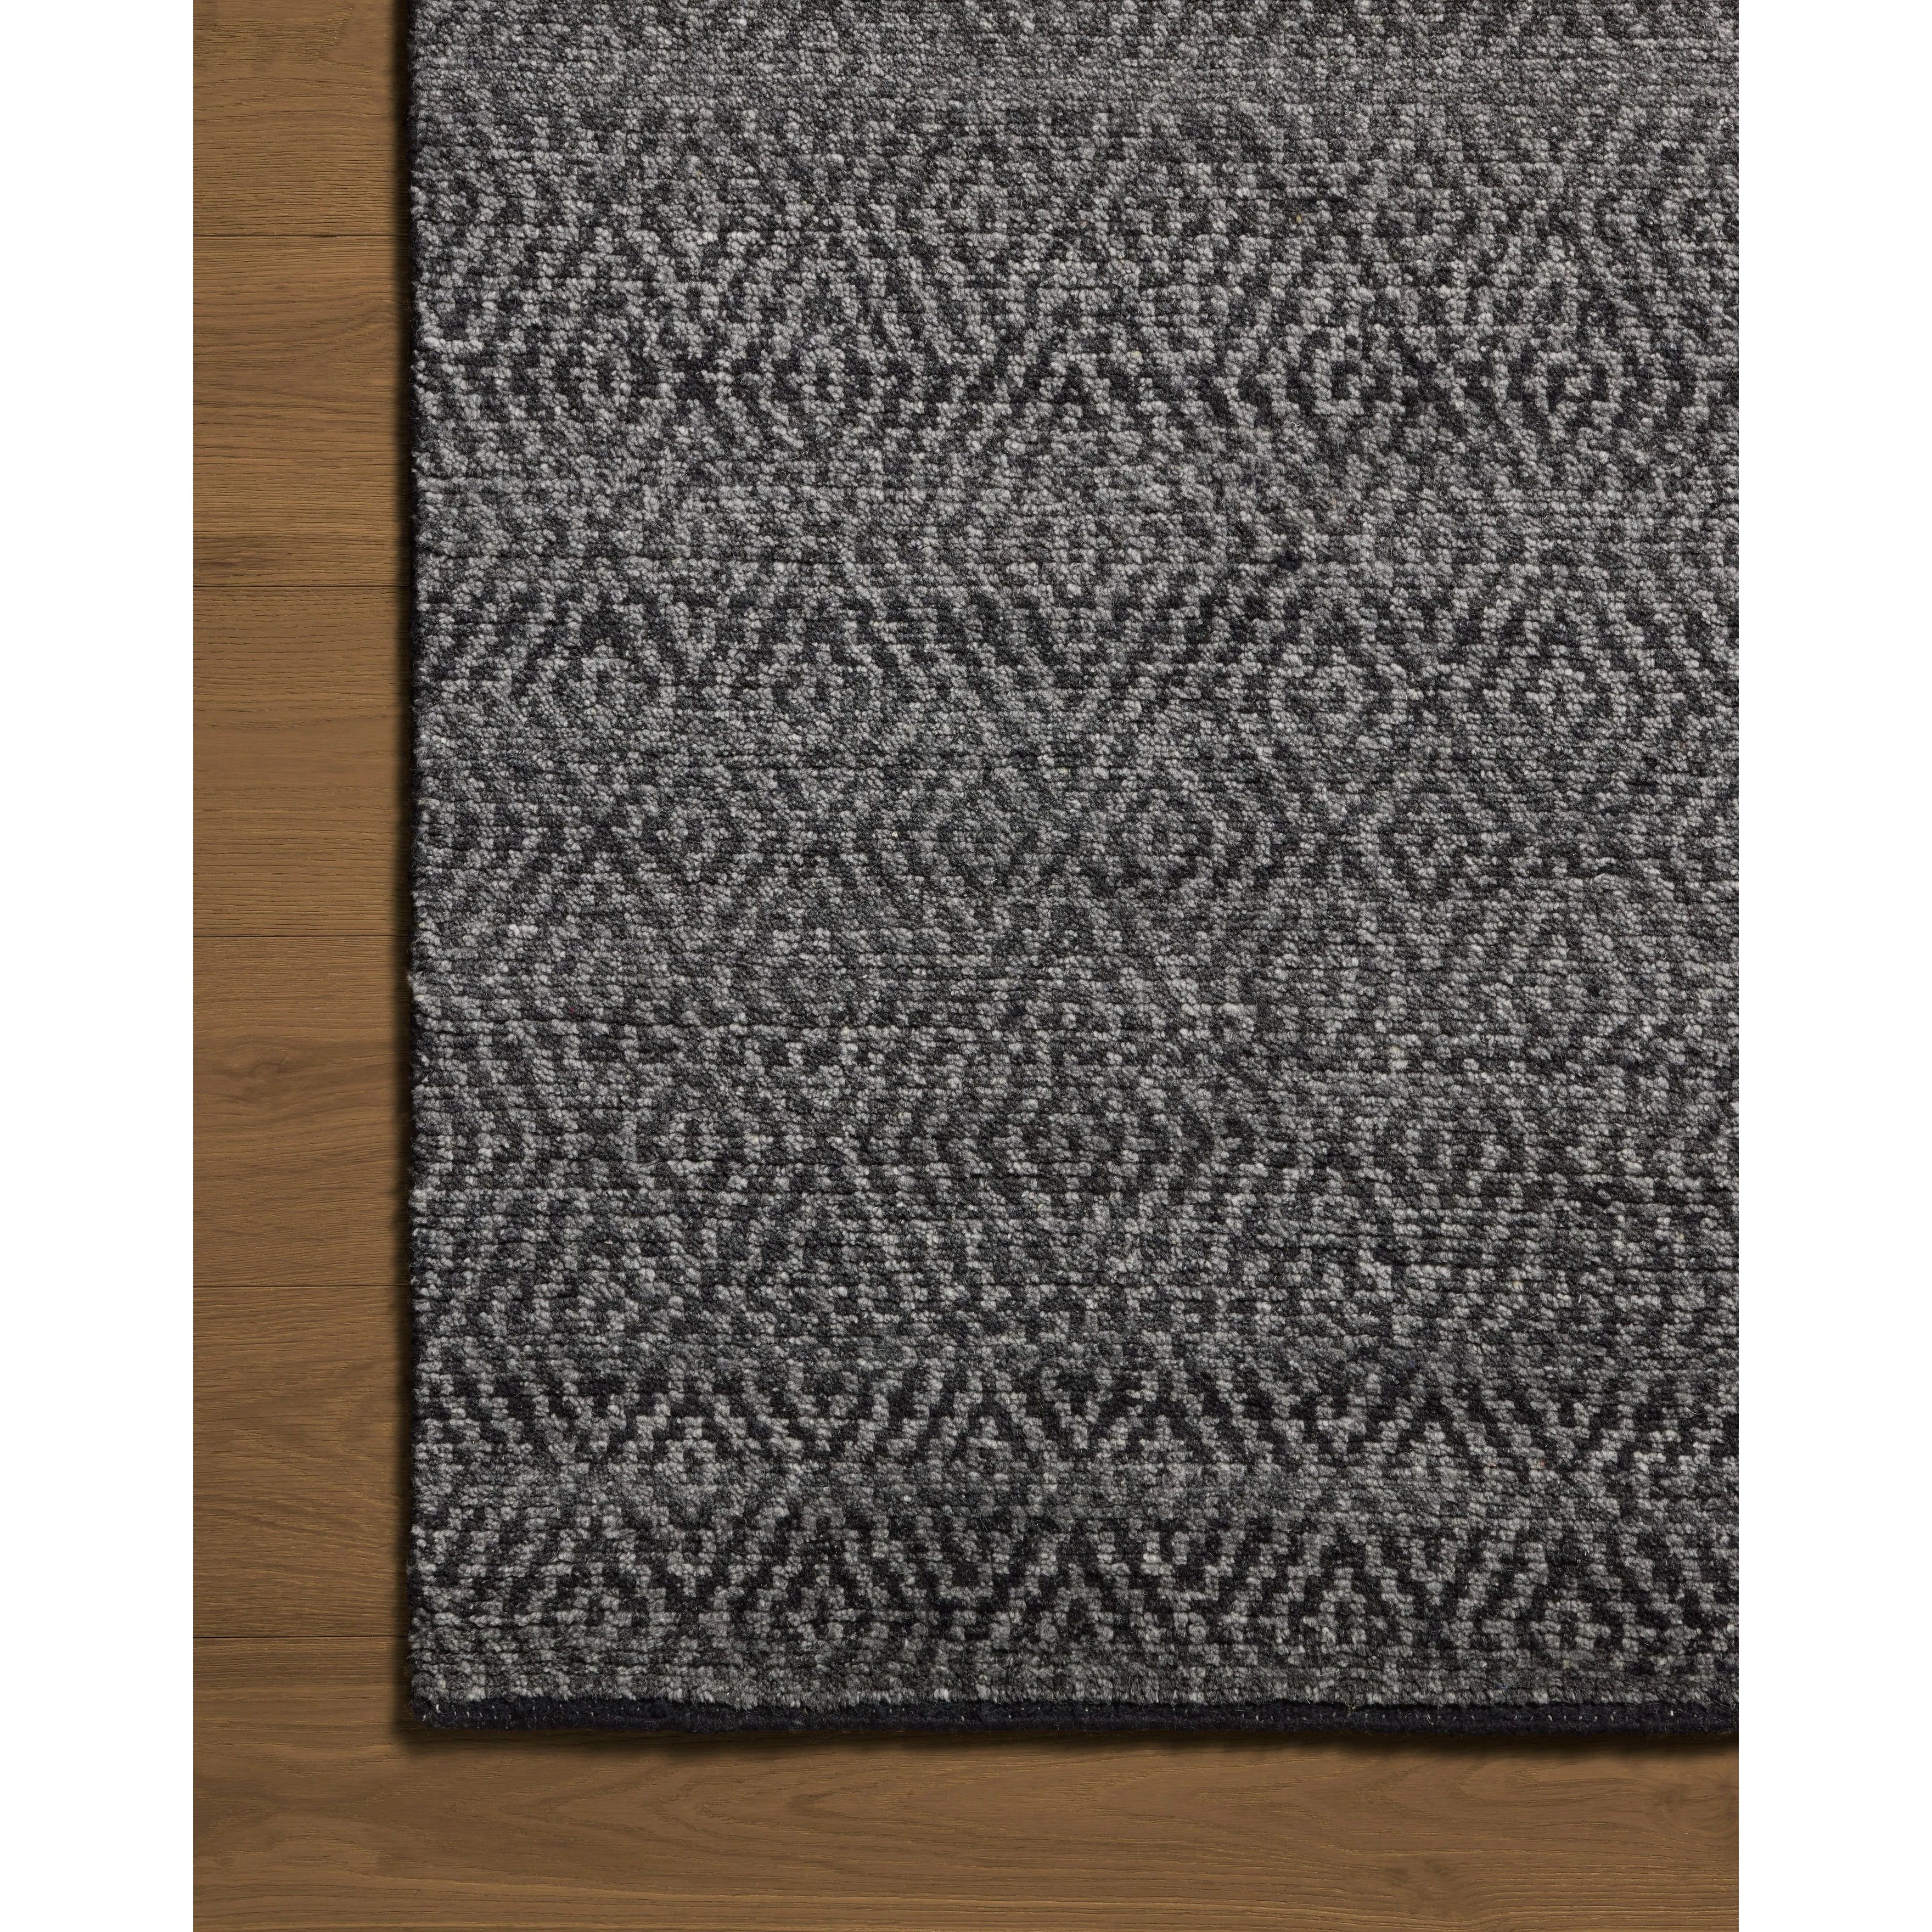 The Grace Charcoal Rug is a hand-knotted area rug with patterns inspired by traditional suiting fabrics, like houndstooth and tweed. The design’s smaller-scale patterns create depth, while the classic patterns invoke the warmth of English countryside interiors. Amethyst Home provides interior design, new home construction design consulting, vintage area rugs, and lighting in the Alpharetta metro area.